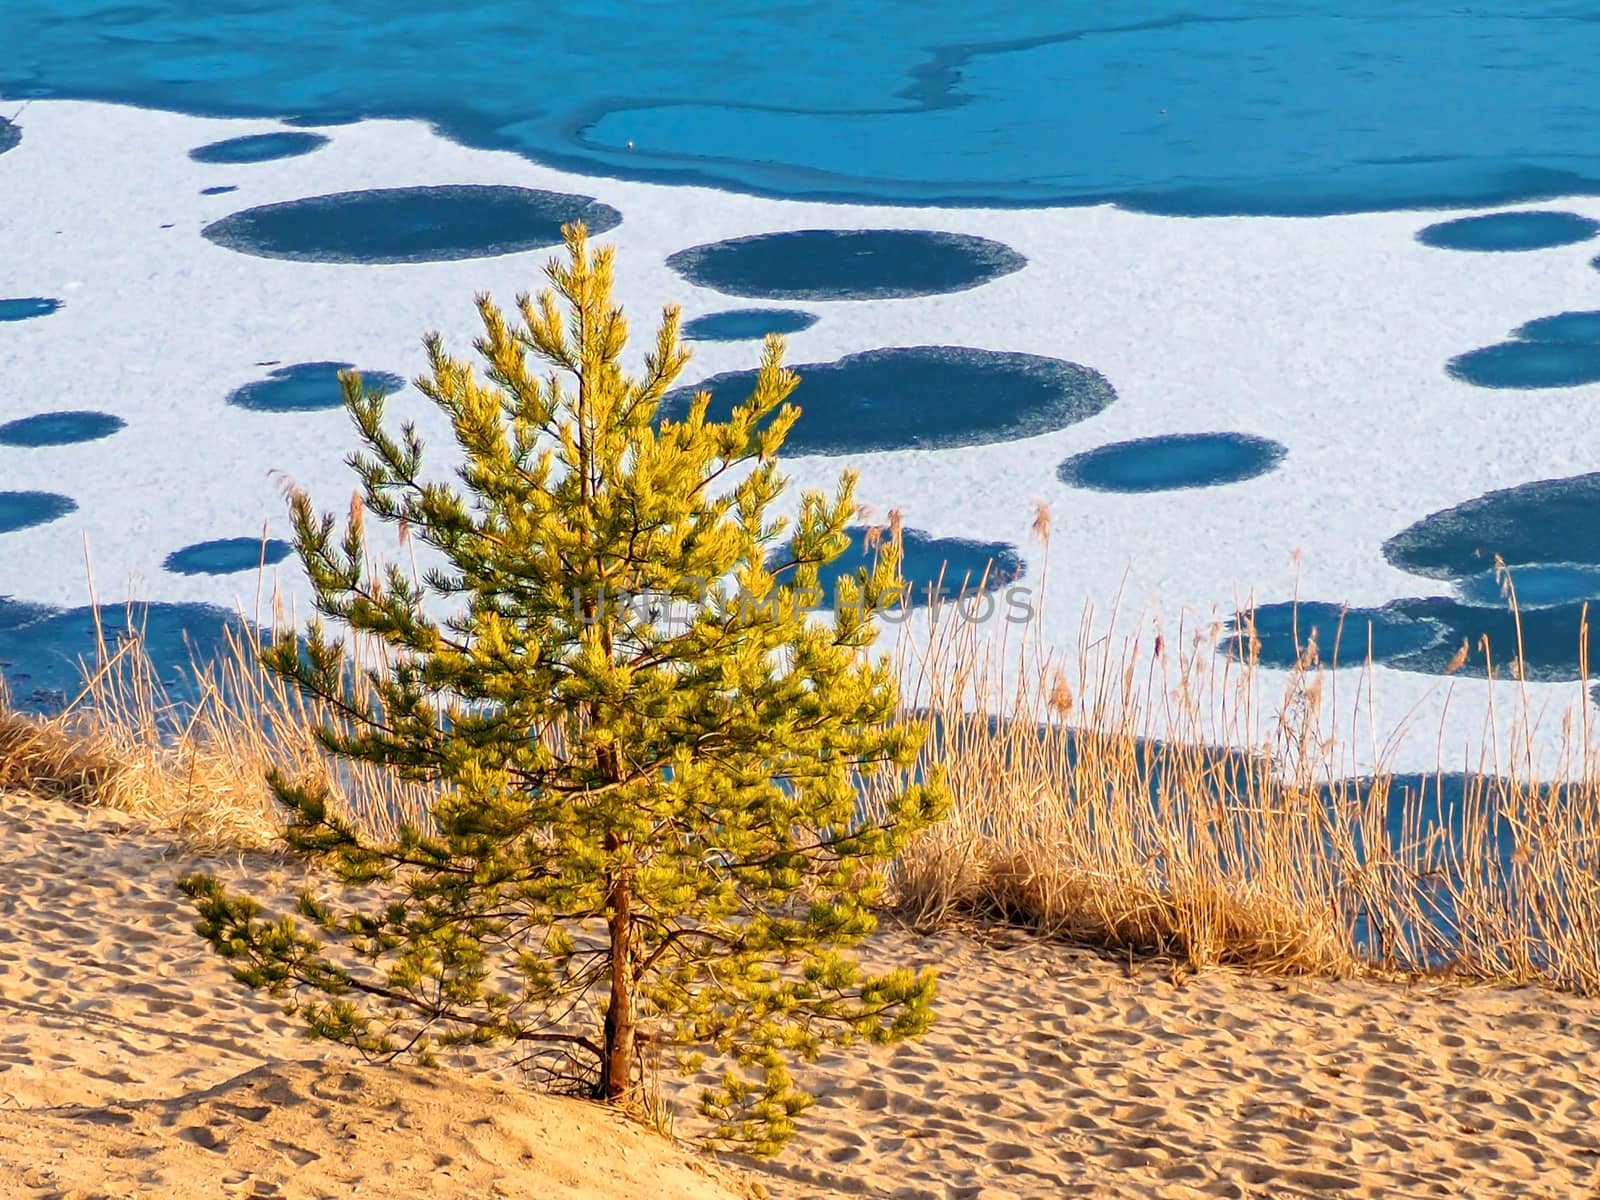 Winter Landscape with water circles and conifers On Beach. frozen lake, snow texture close-up. Abstract shapes. Tallinn, Estonia. Panoramic view. Copy space for text. Image for wallpaper and desktop